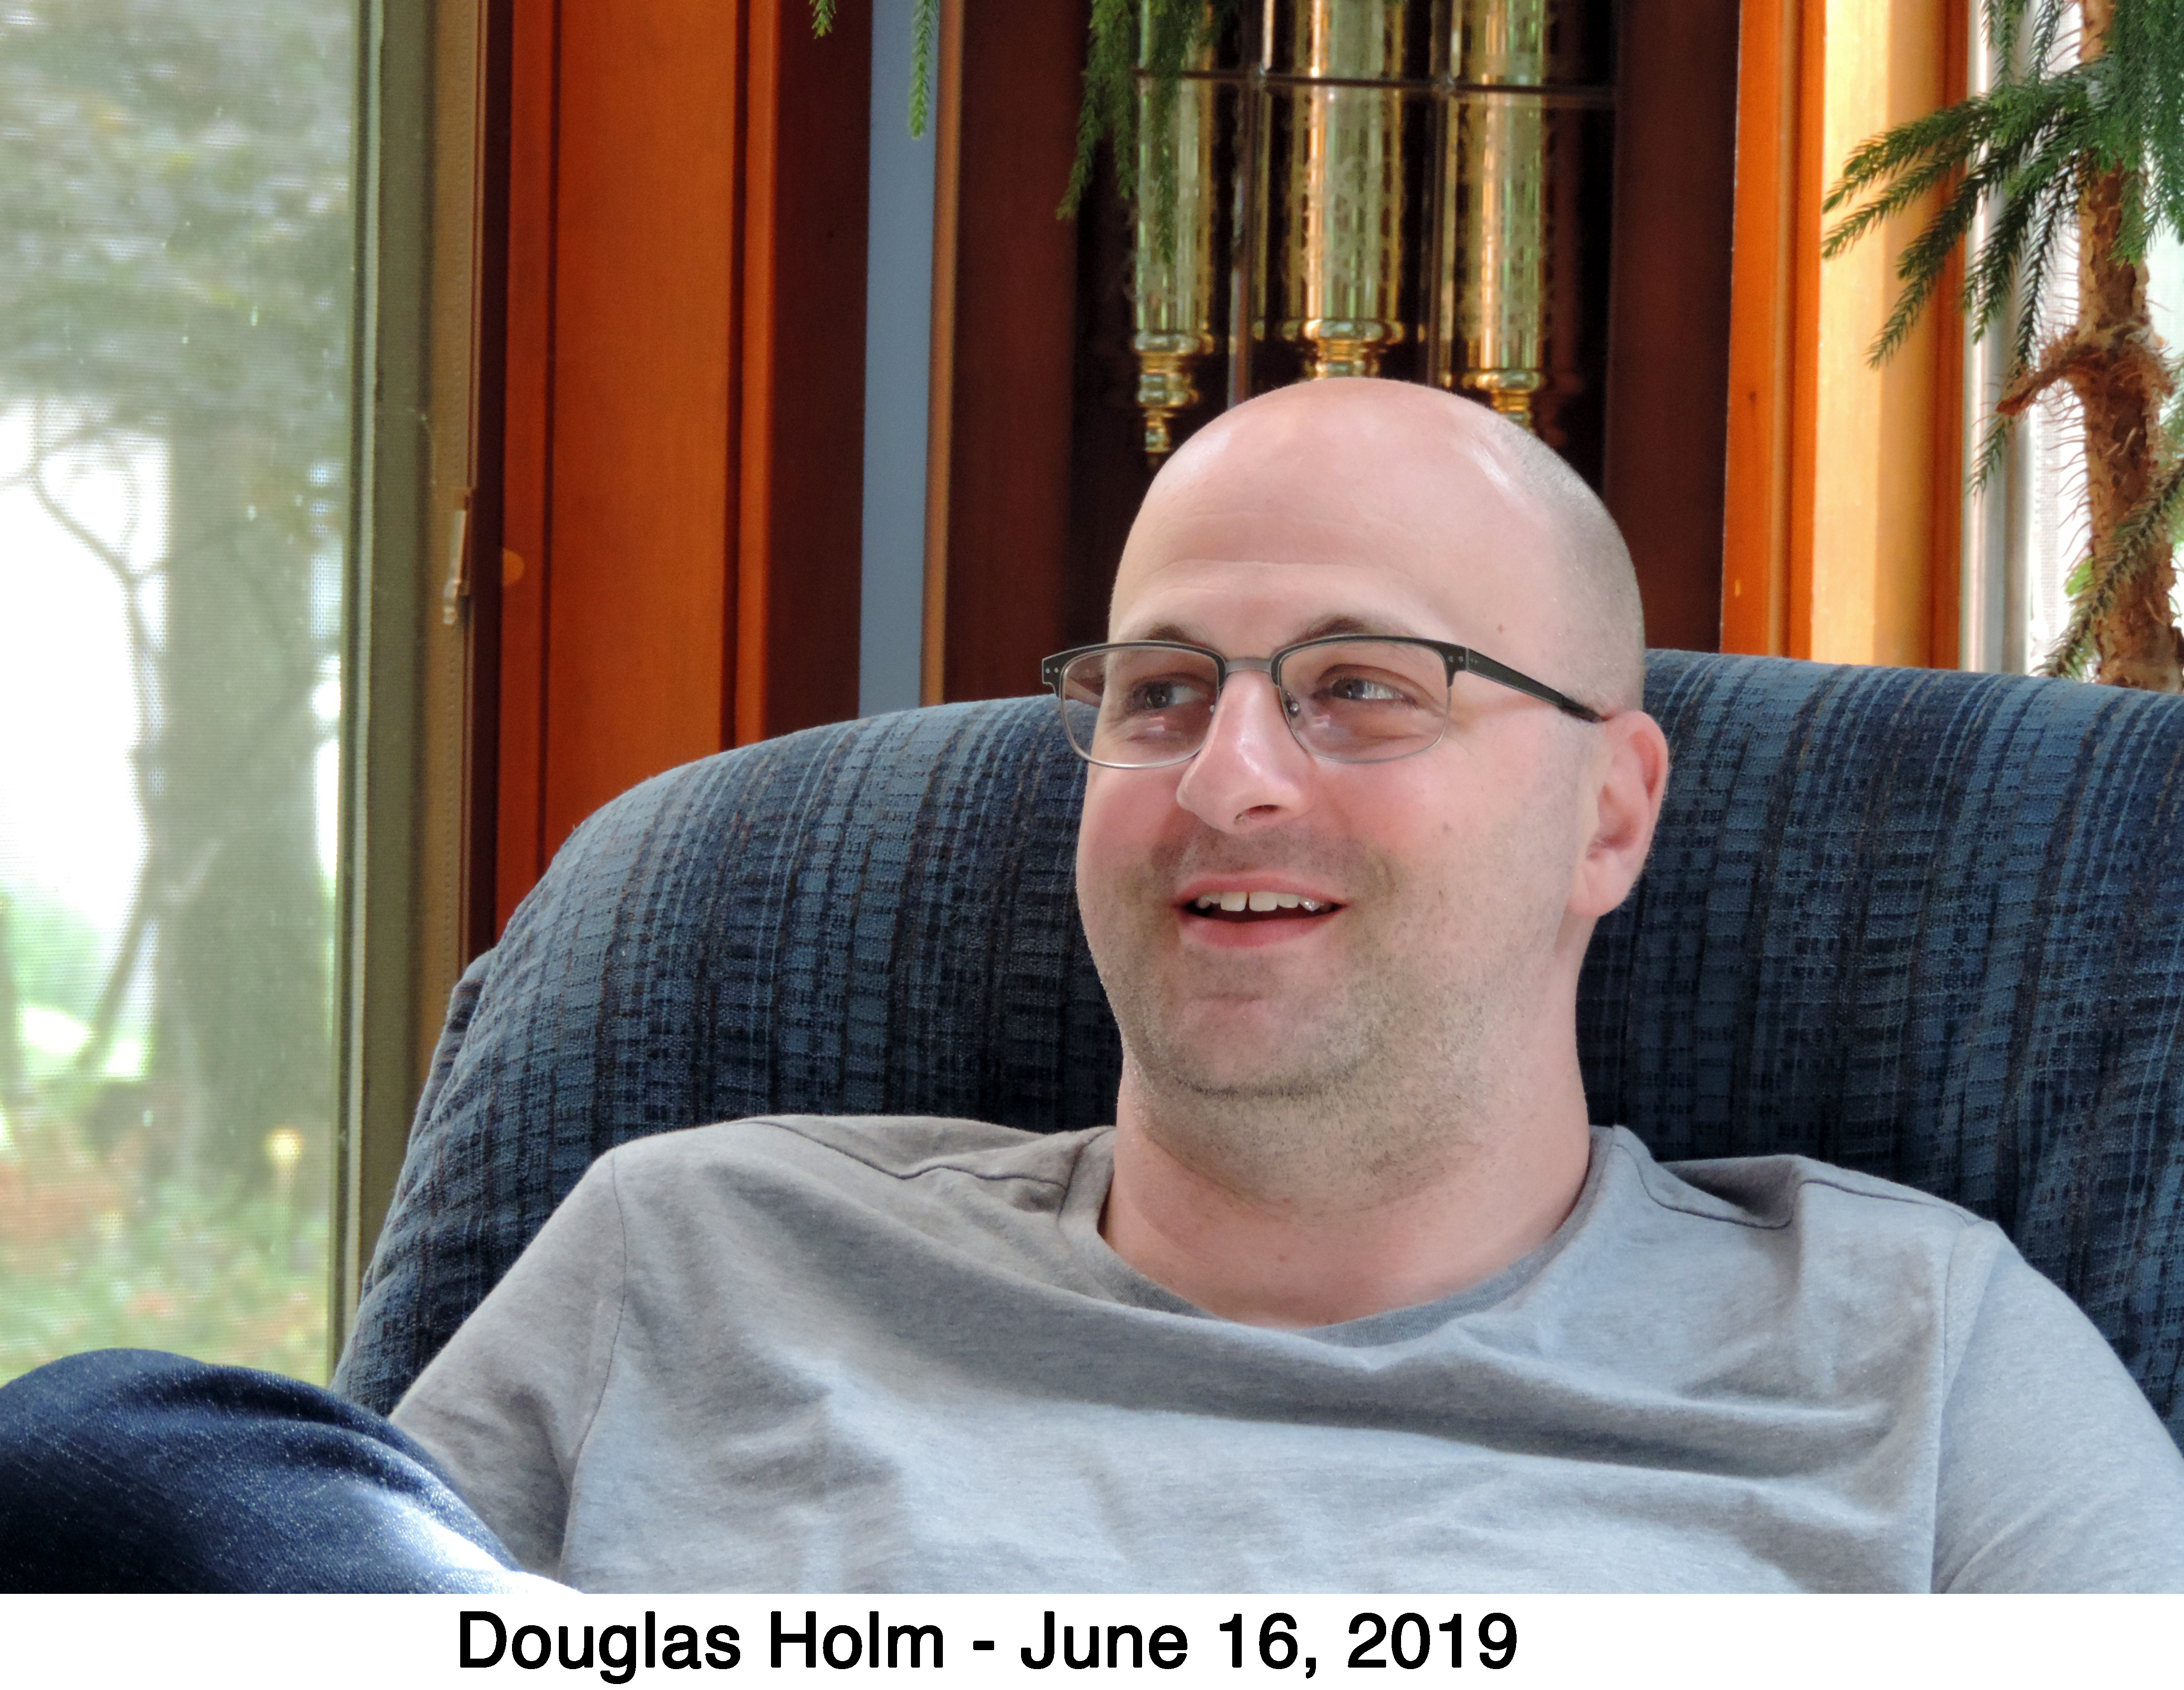 Douglas Holm smiling while sitting in a chair